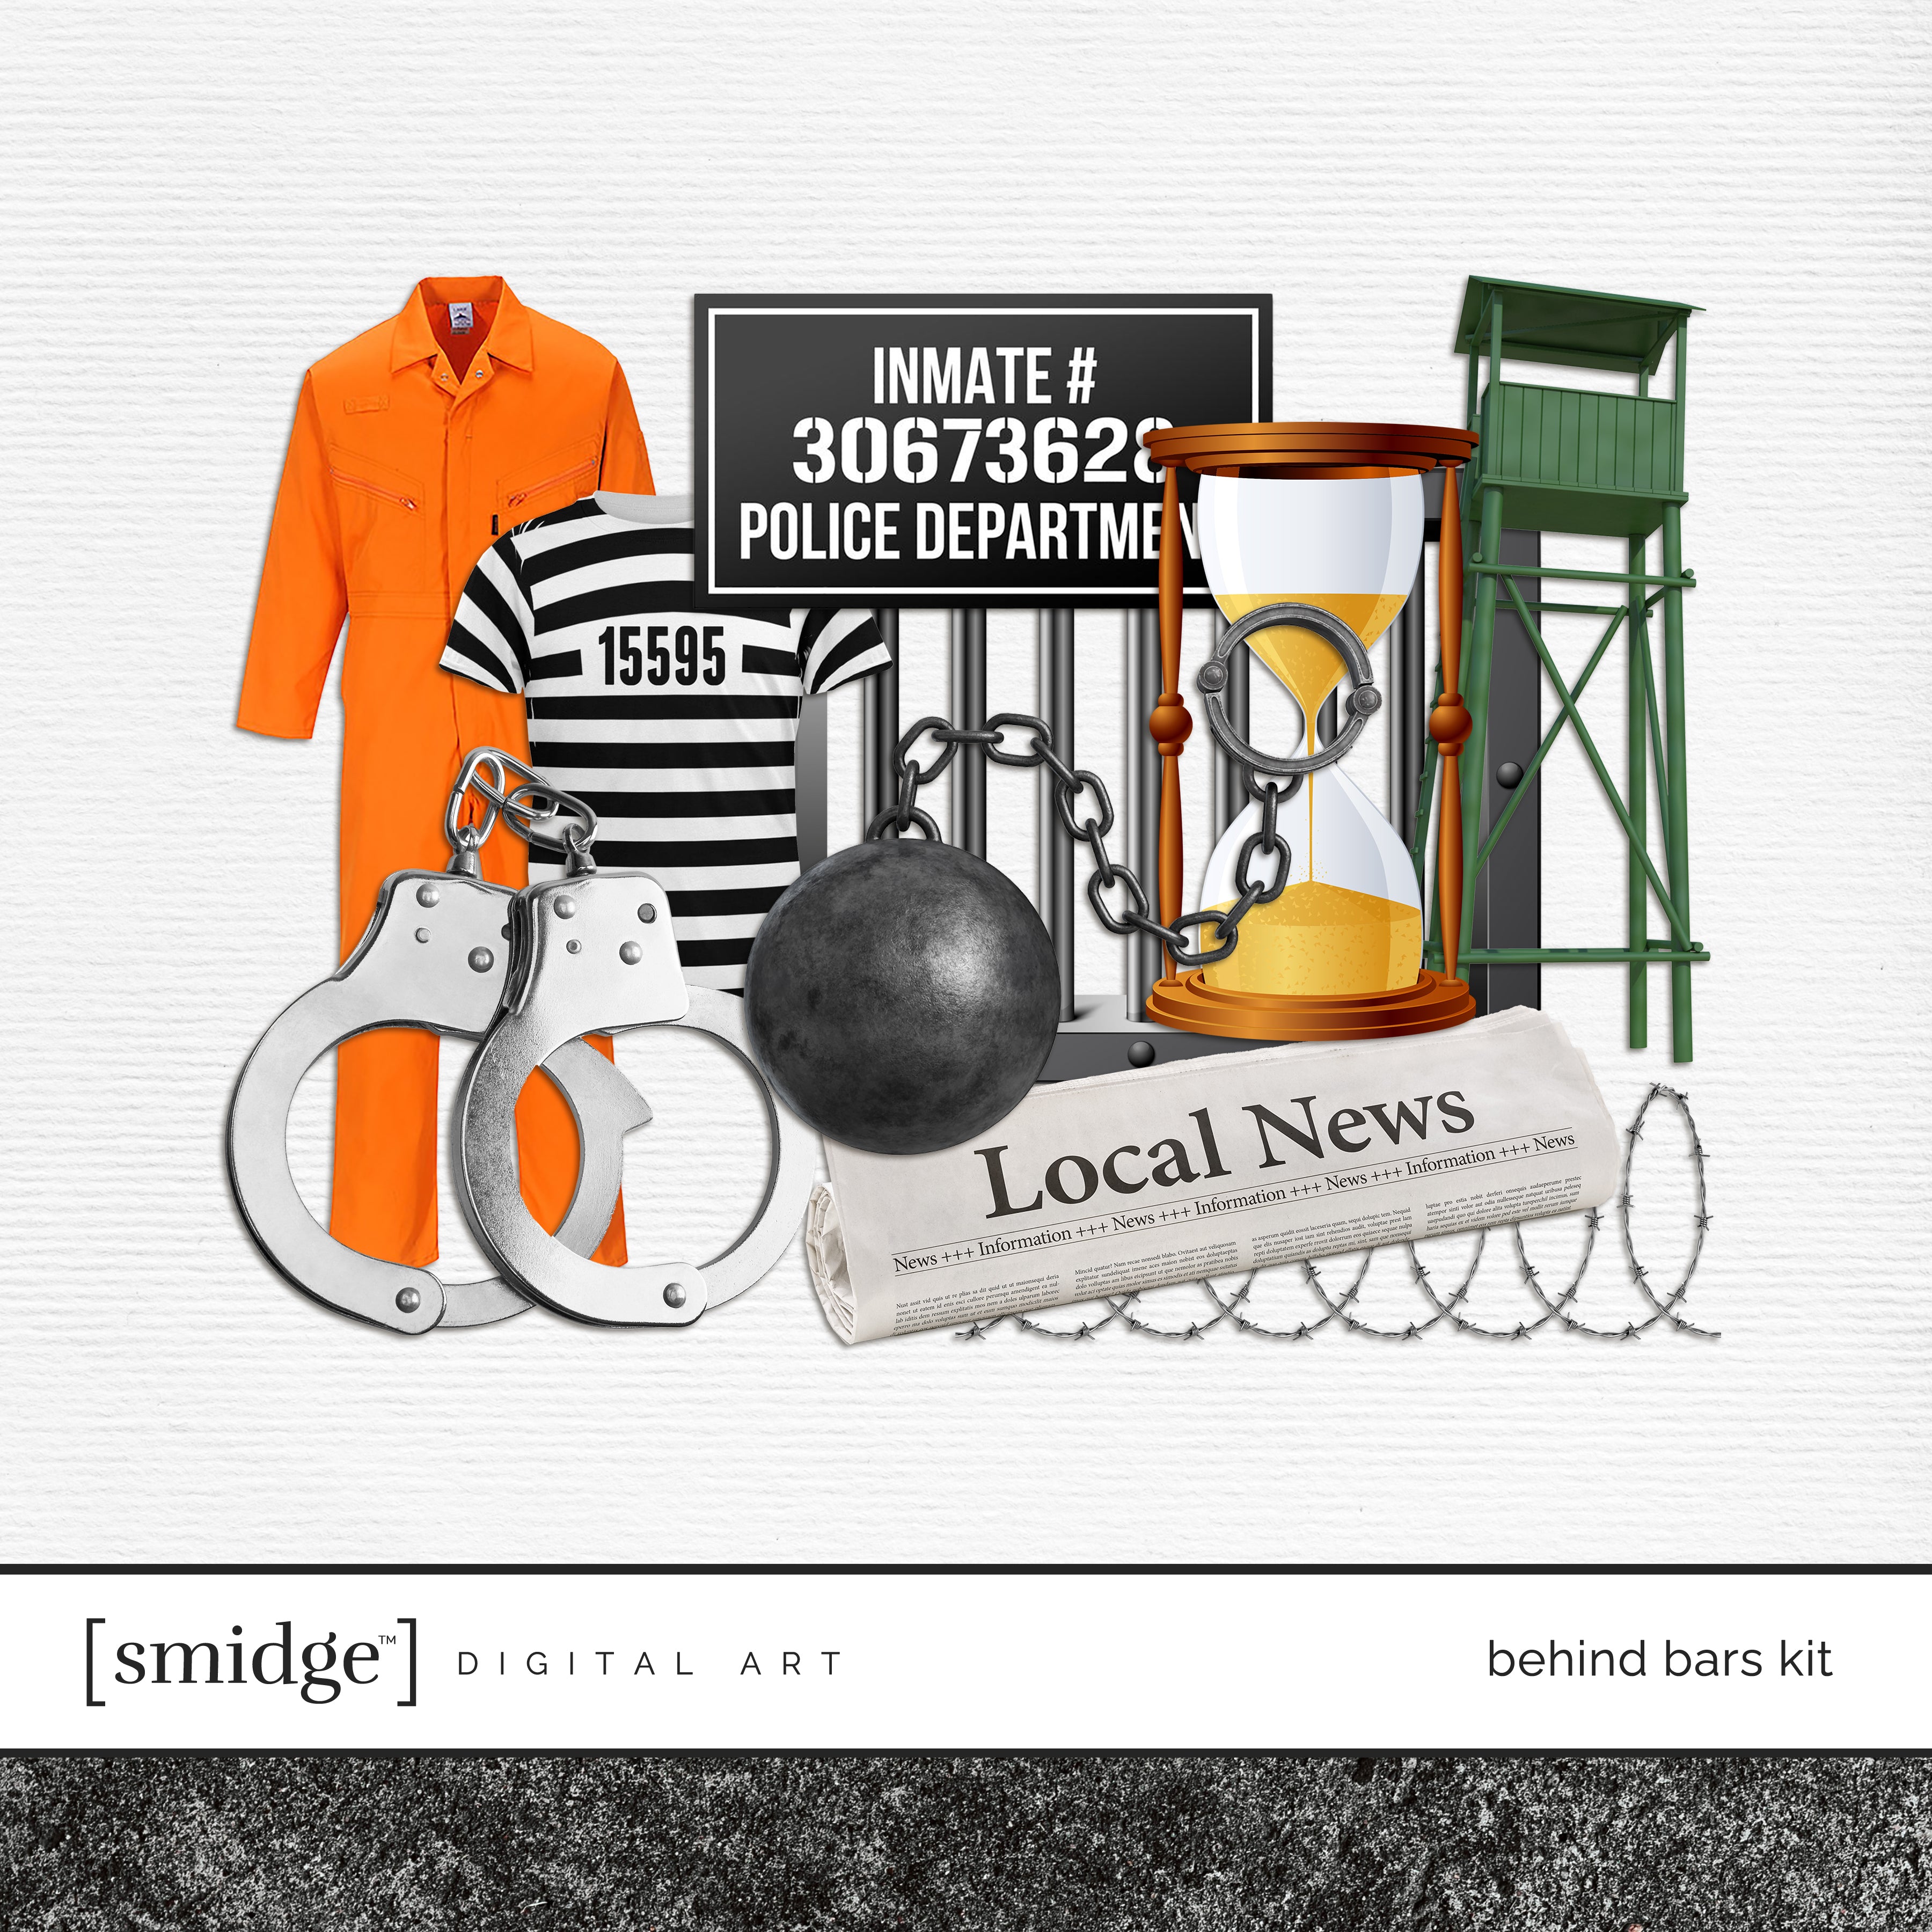 Establish your alibi! If you love watching true crime shows or enjoy murder mystery, now is your chance to pick up this realistic Behind Bars Digital Scrapbooking Kit filled with a perfect smidge of digital art elements. Digital embellishments include orange jumpsuit, inmate sign from police department, local newspaper, barbed wire, handcuffs, black and white striped t-shirt, bars on window, ball and chain, criminal watch tower, and hourglass.